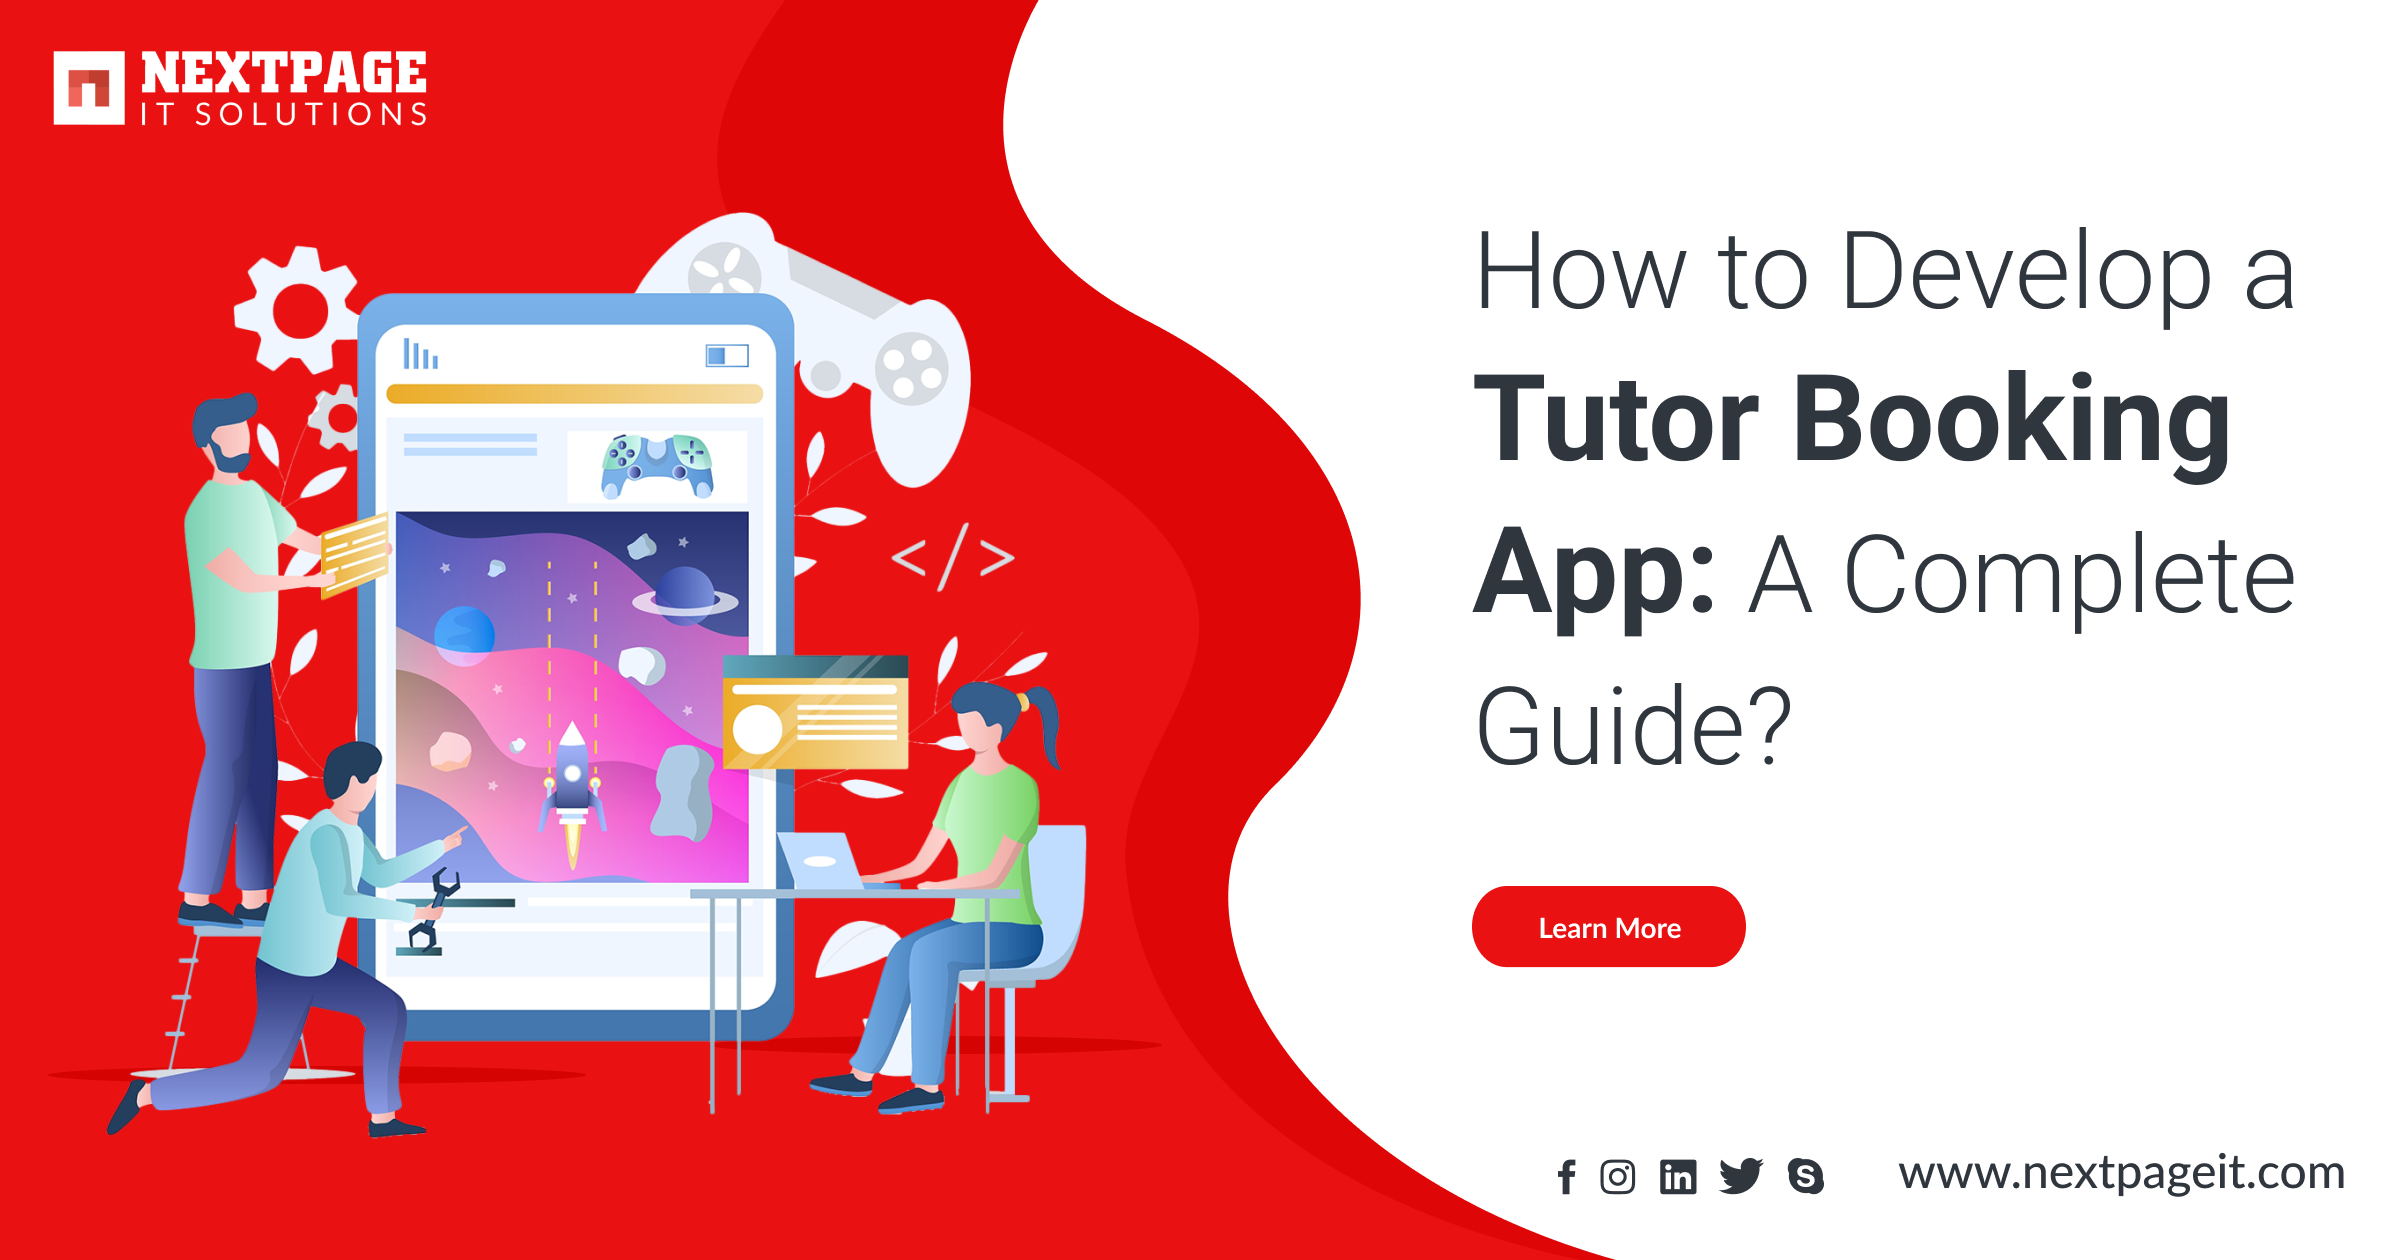 How to Develop a Tutor Booking App